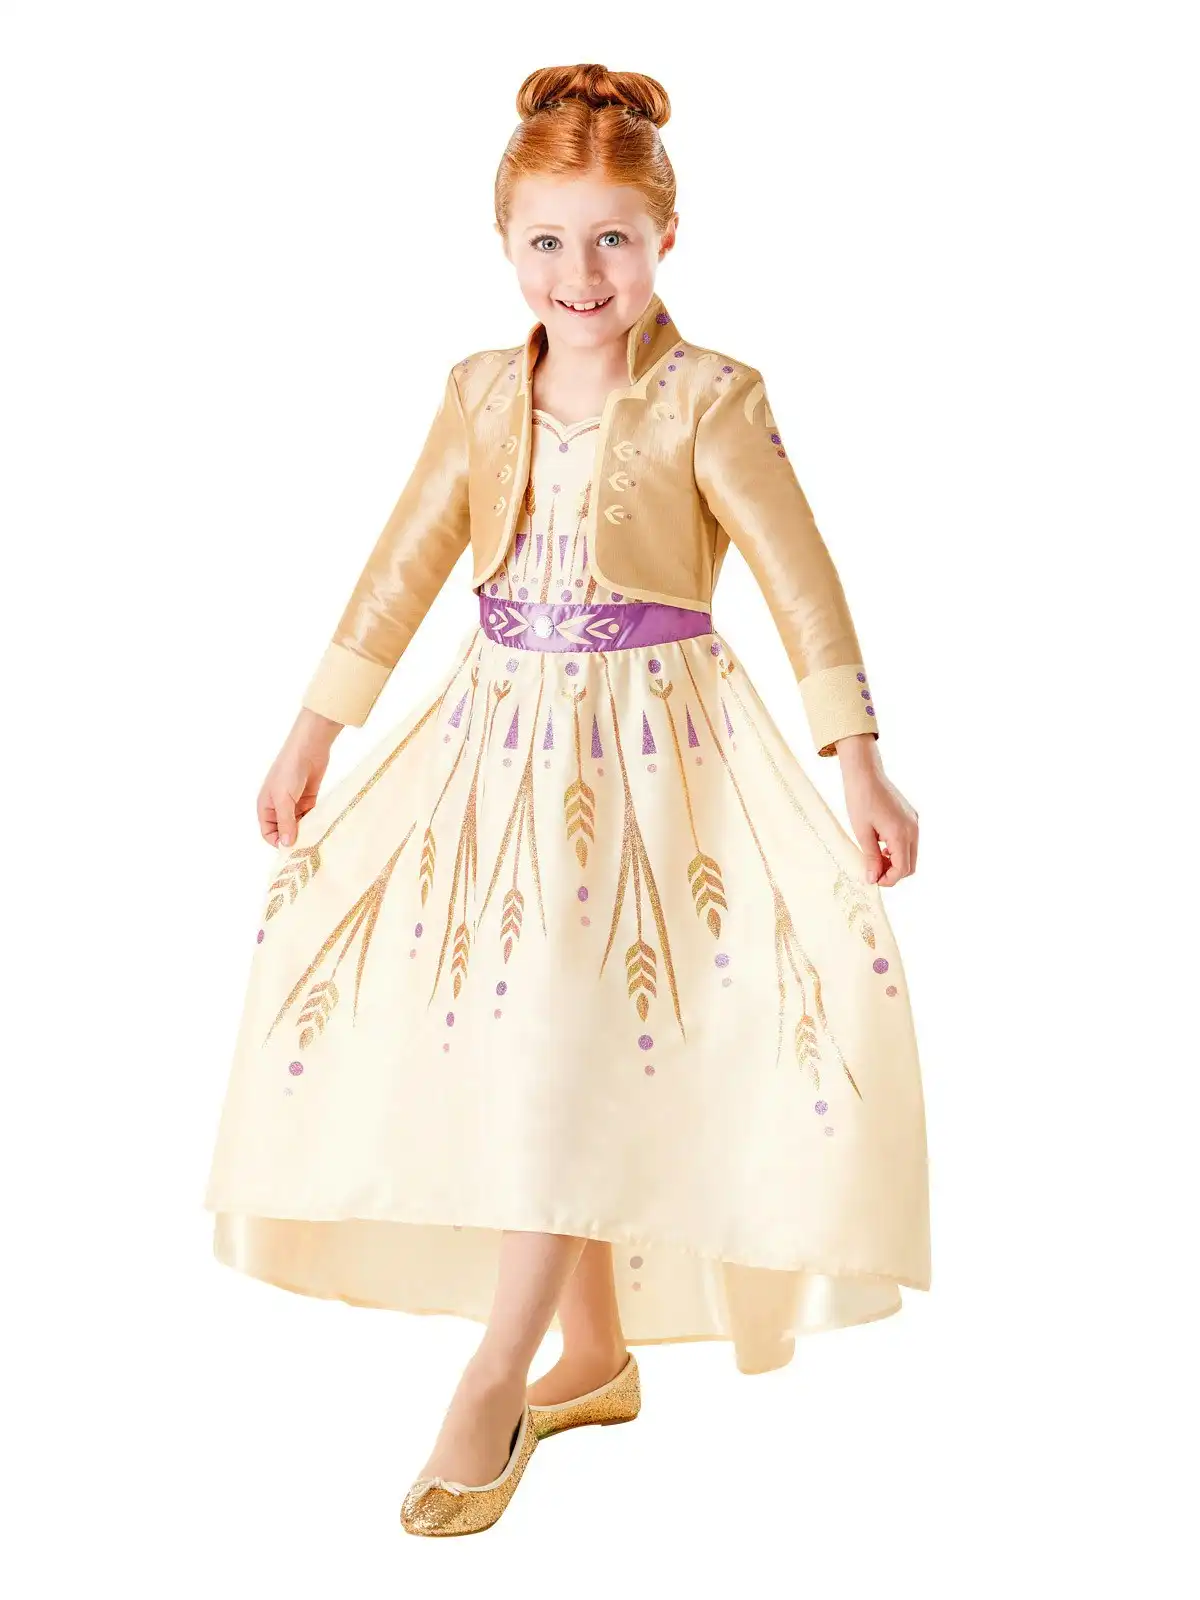 Disney Anna Frozen 2 Prologue Dress Up Girls Halloween Party Costume Size 4-6y